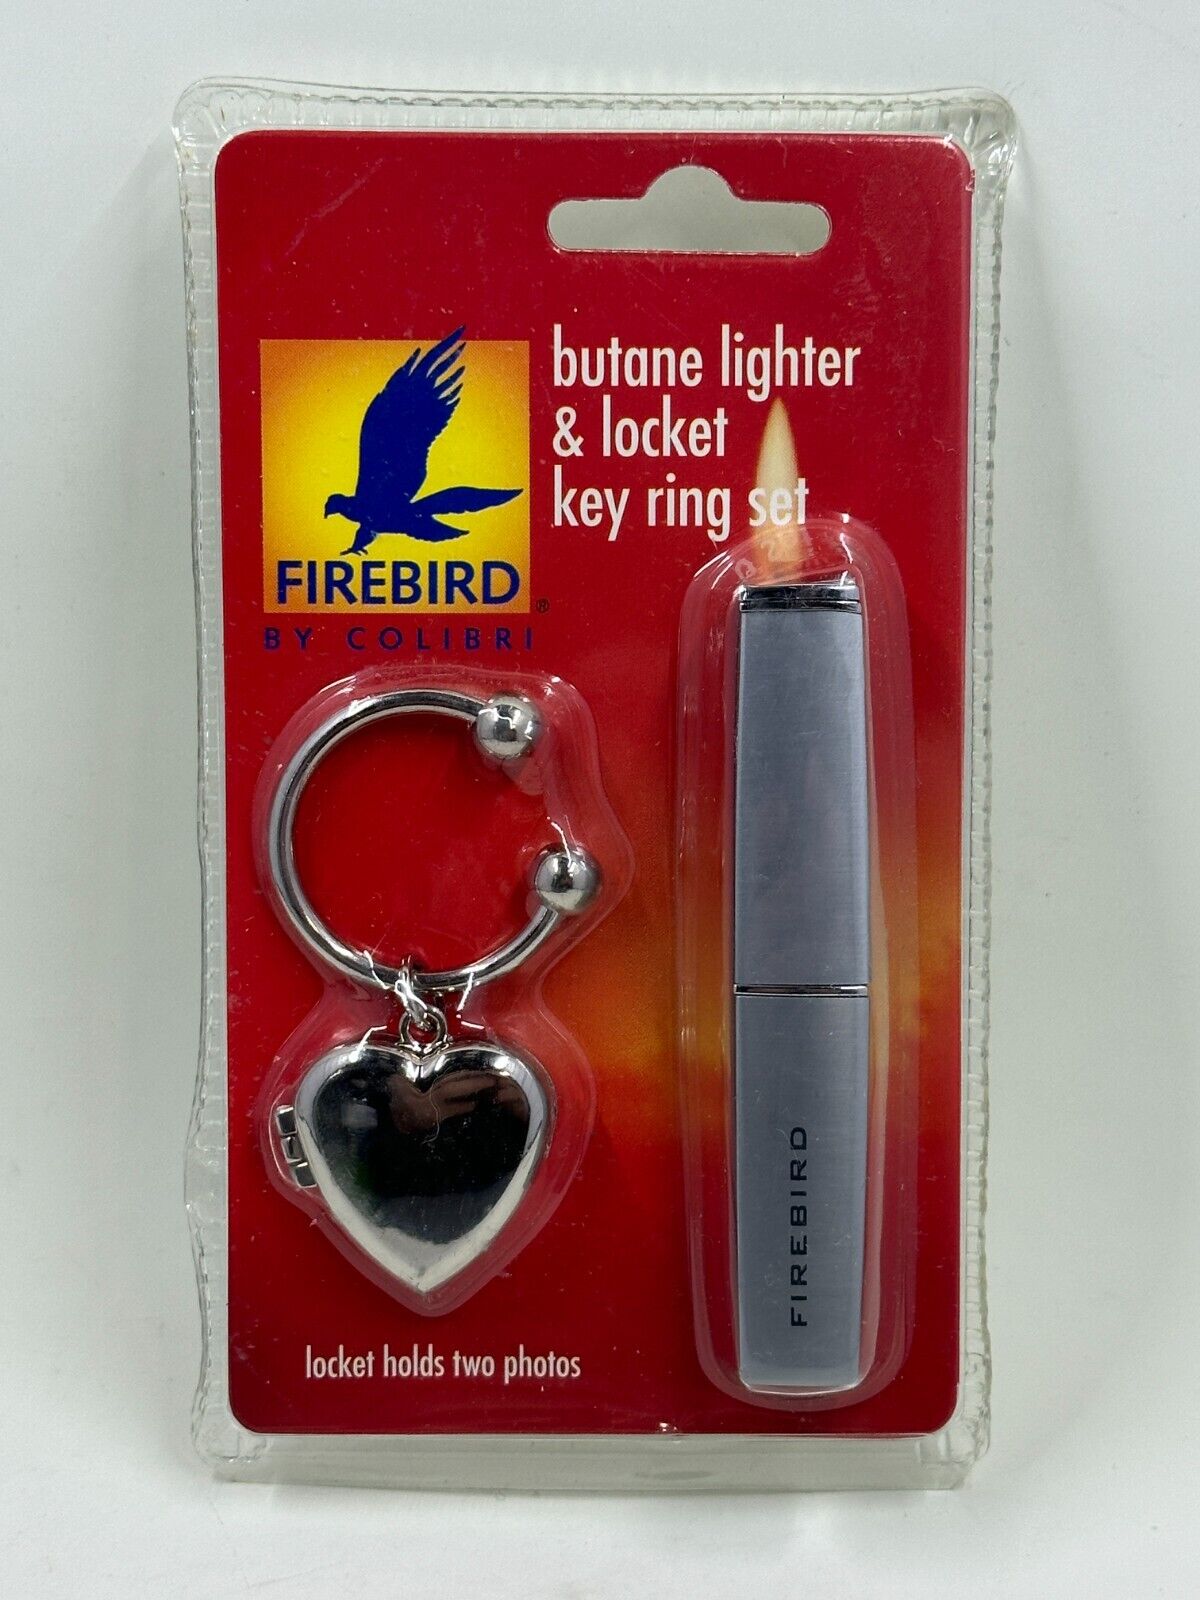 Firebird By Colibri Butane Lighter And Locket That Holds 2 Photos On A Key Ring 